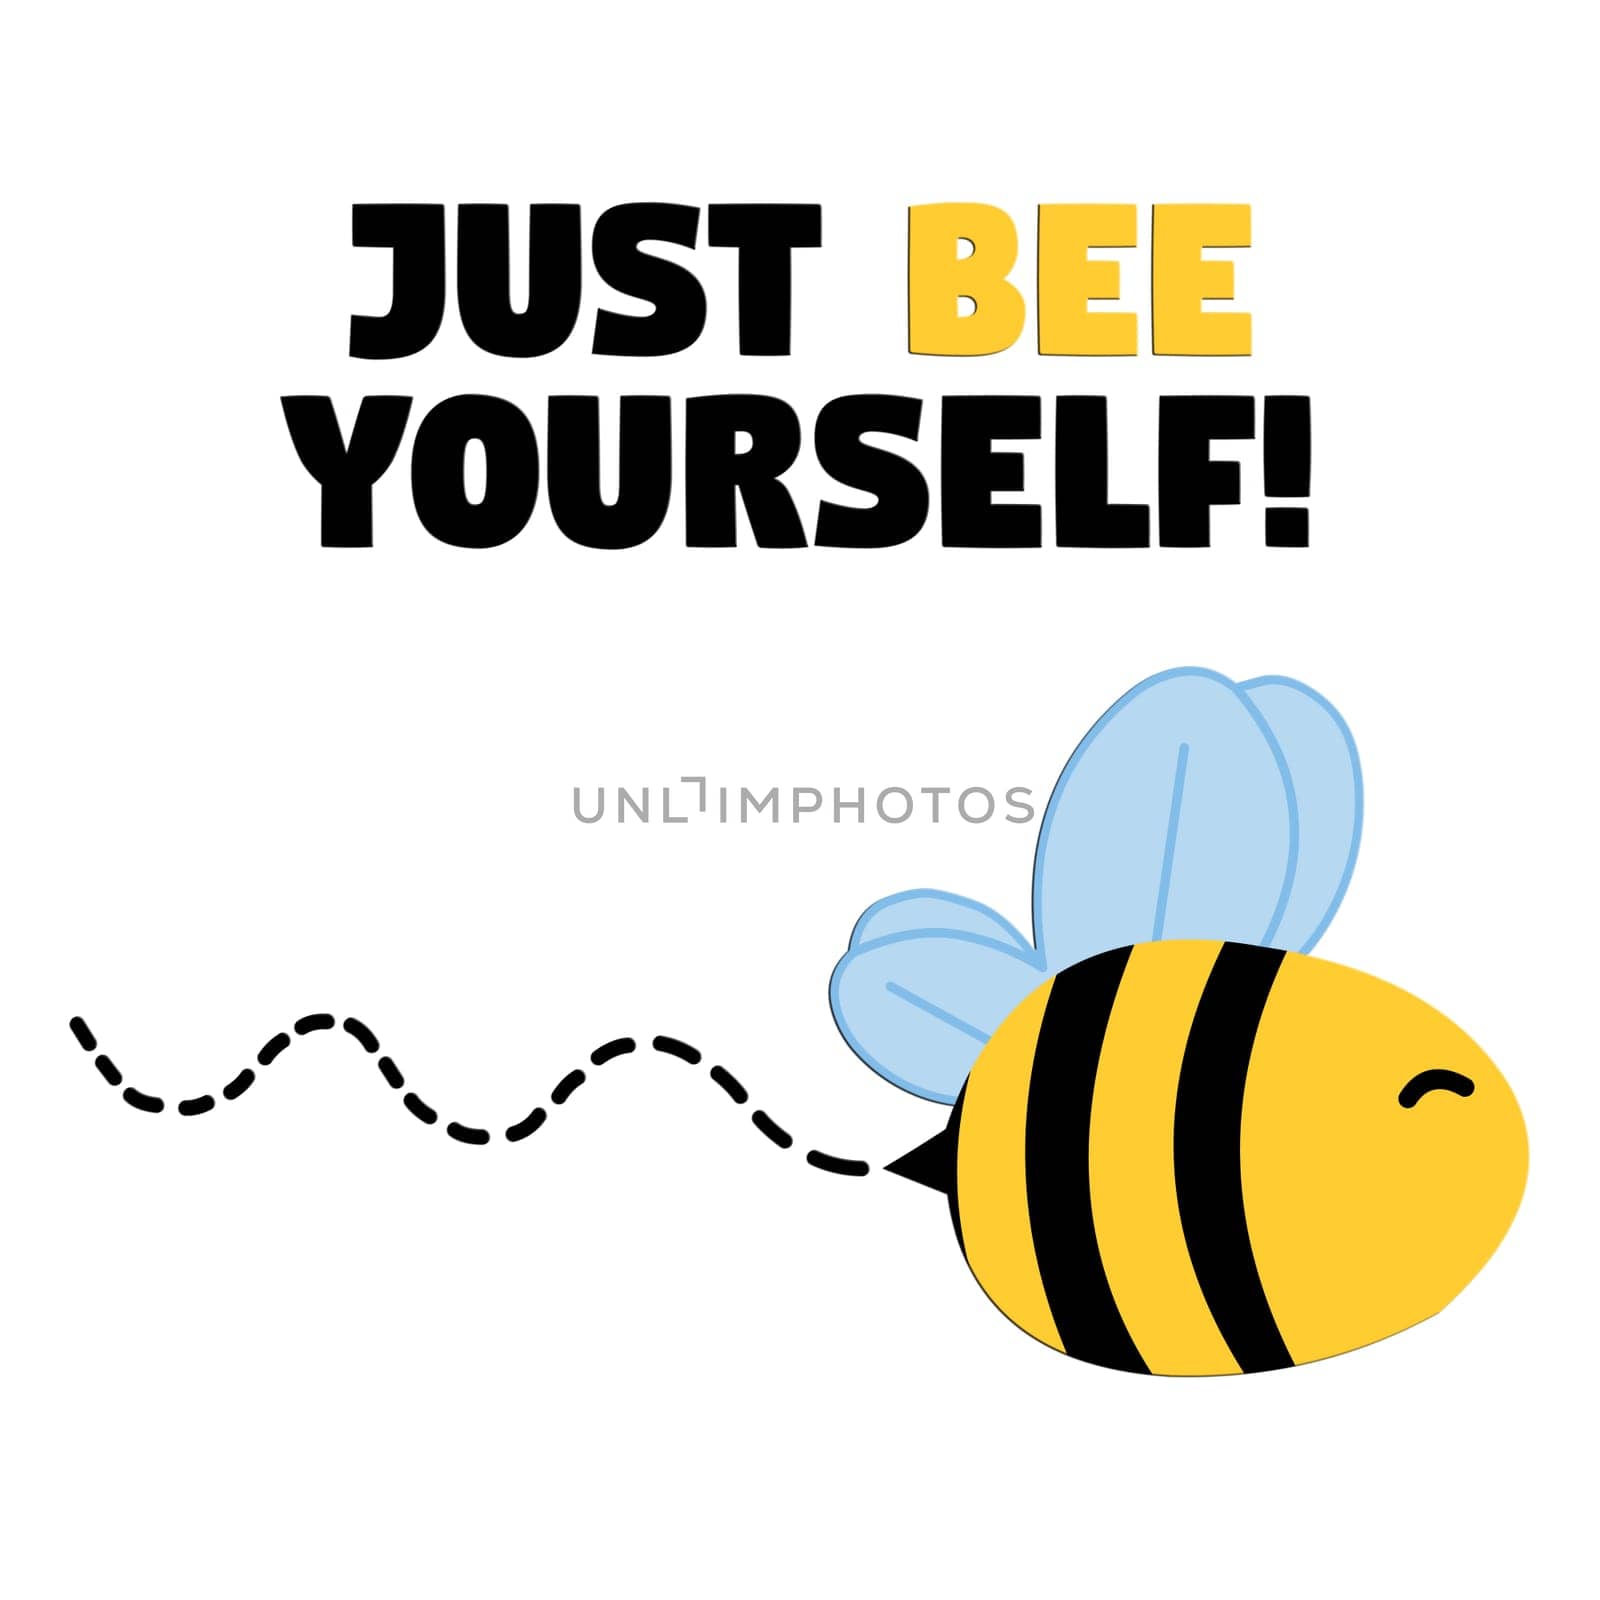 A inspirational bee flying with the text "just be yourself".